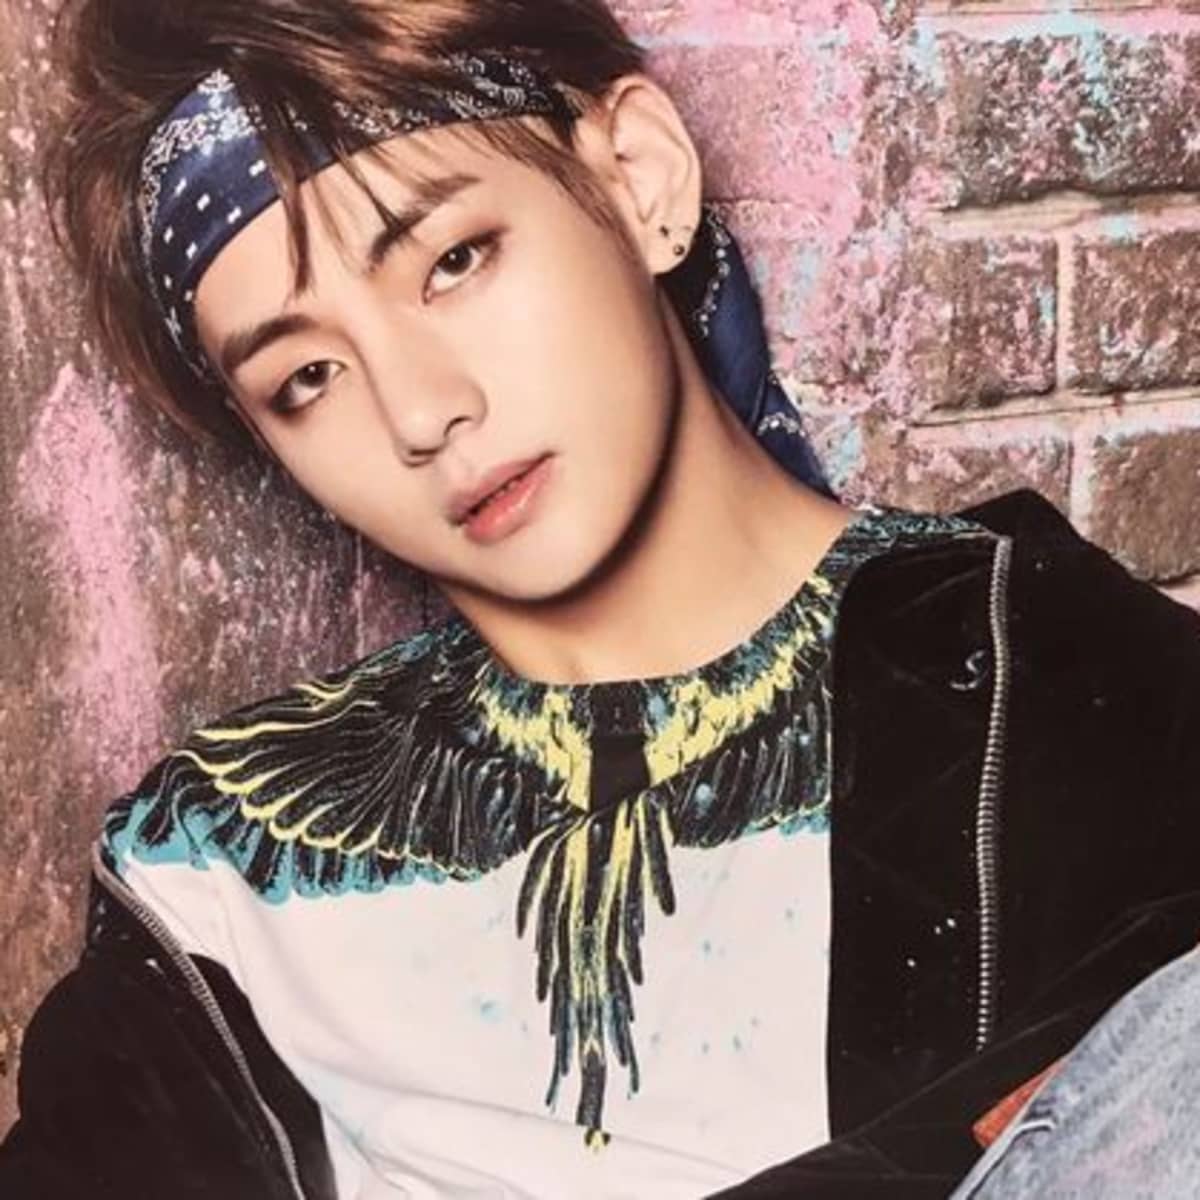 ARMYs Express Anger At People's Behavior Towards BTS's V As He